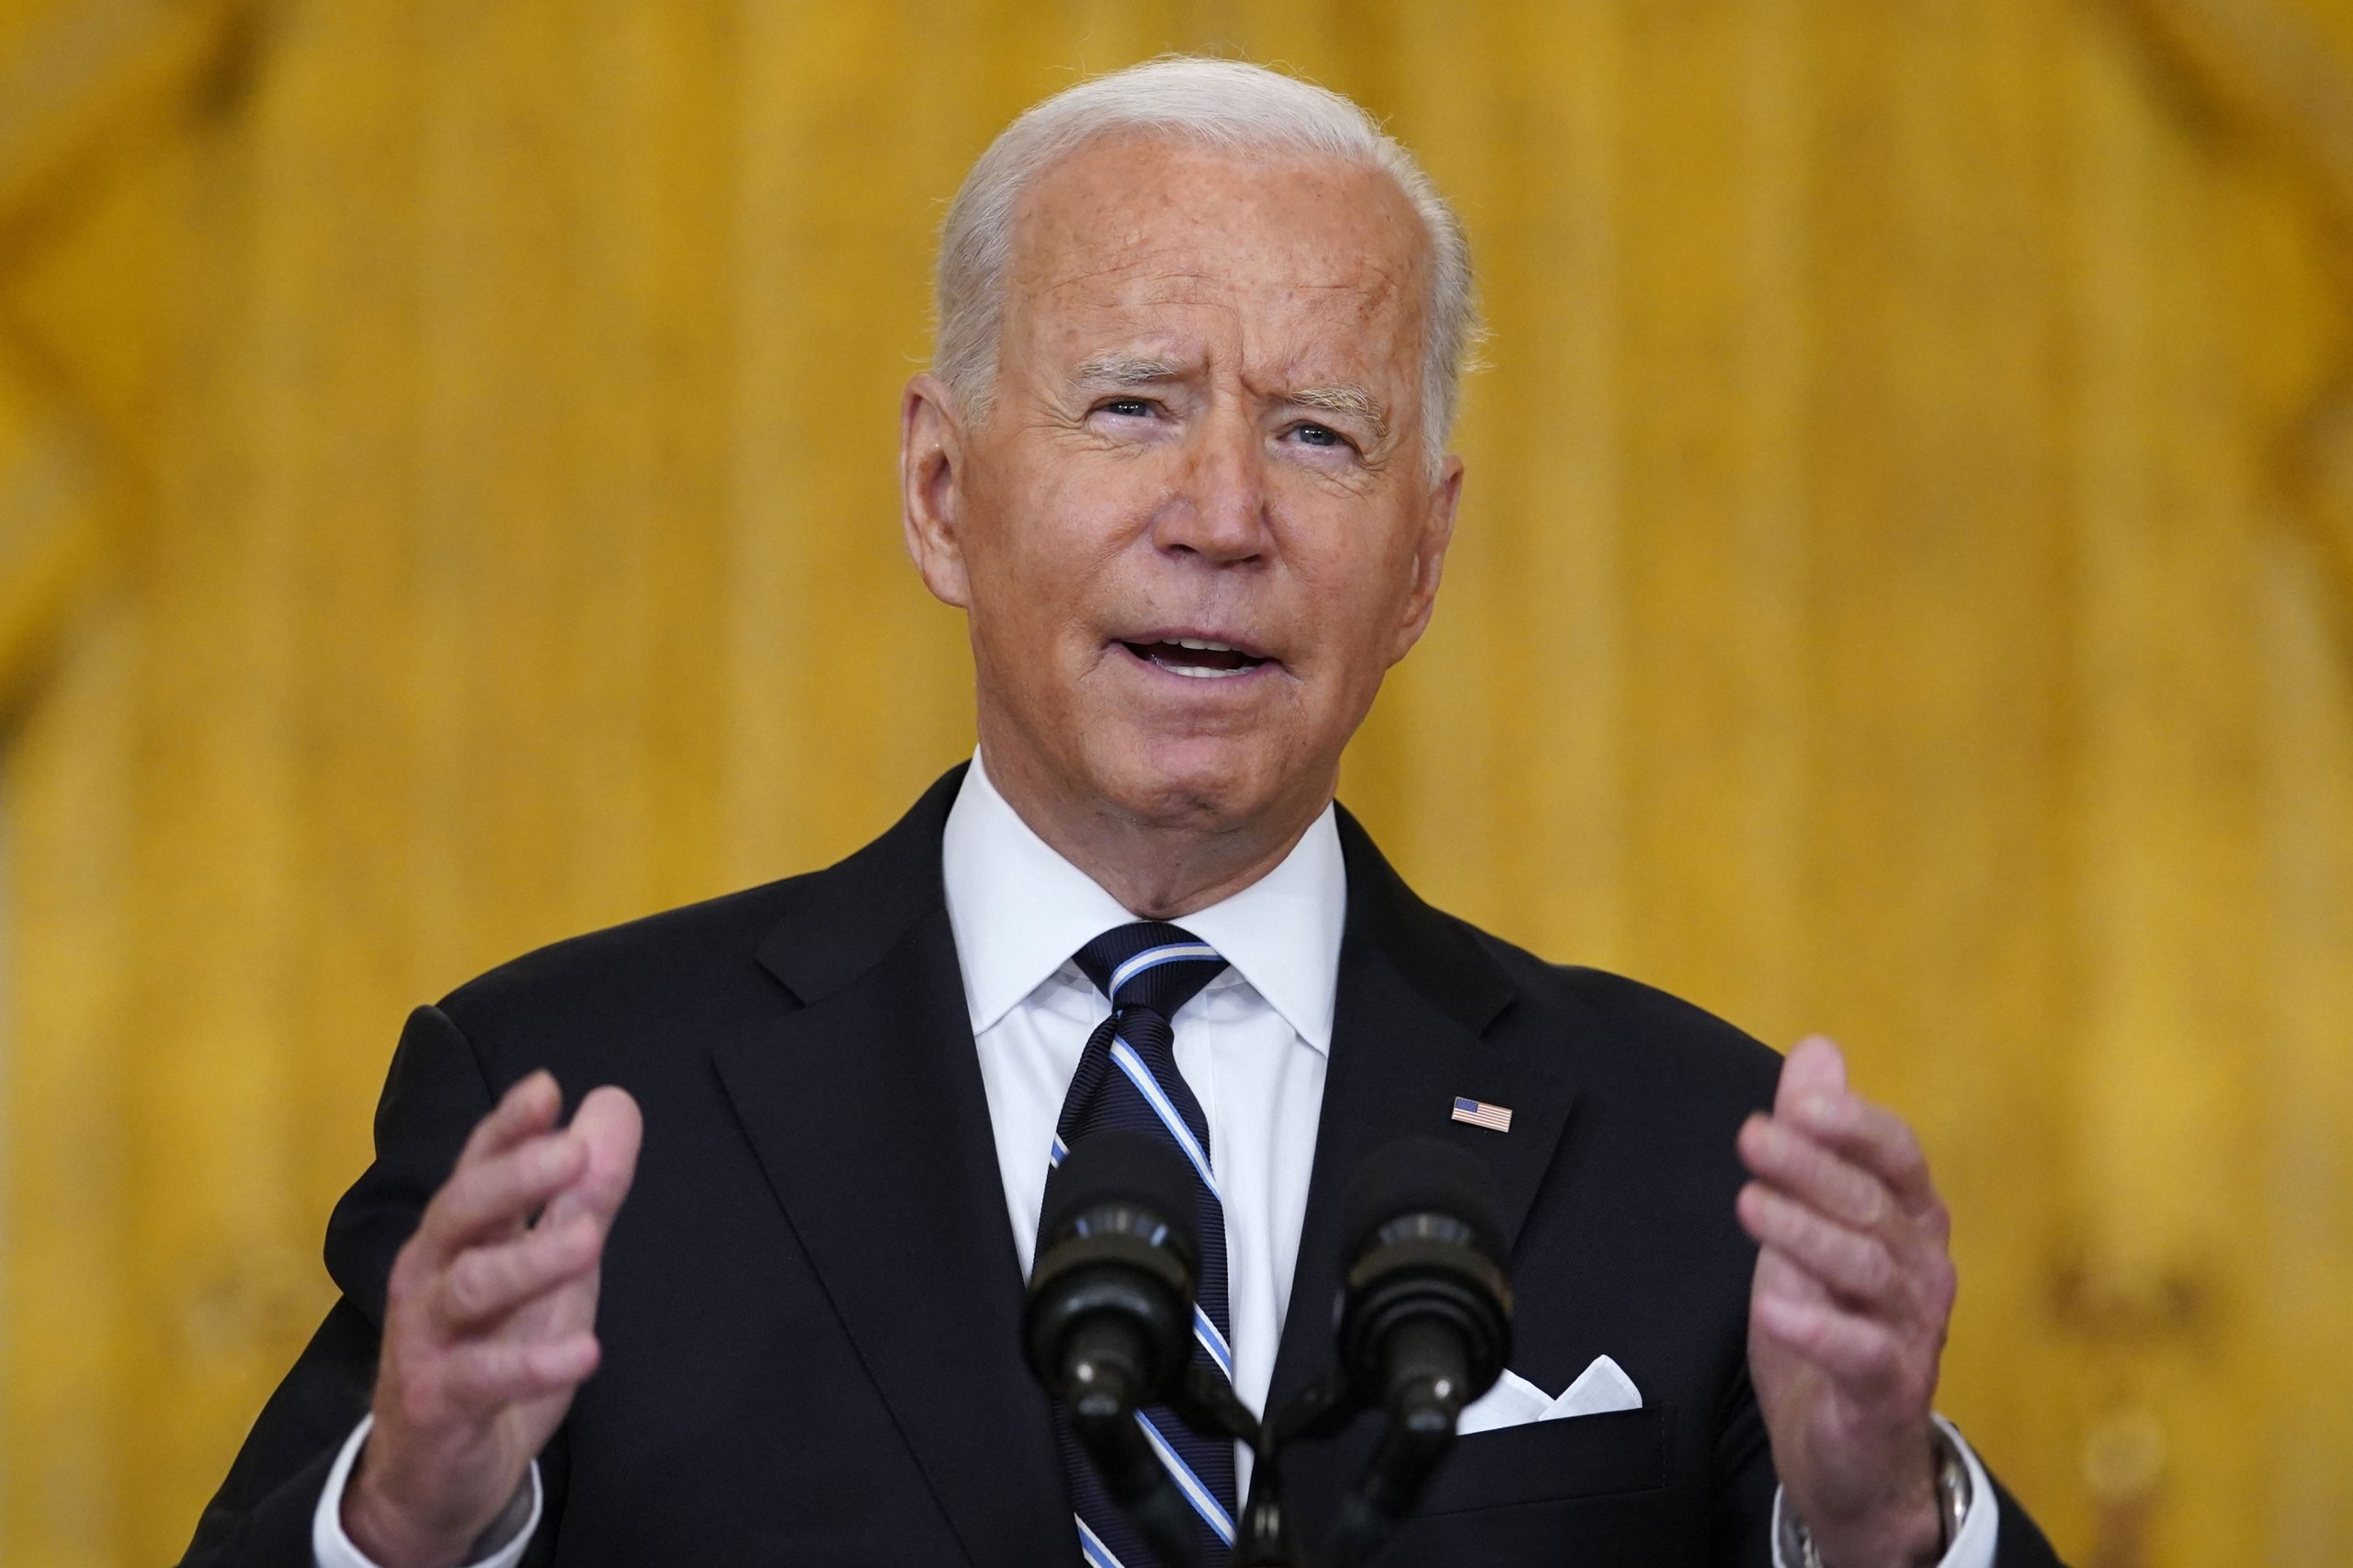 Team Biden to discharge student loans for over 300,000 borrowers with disabilities